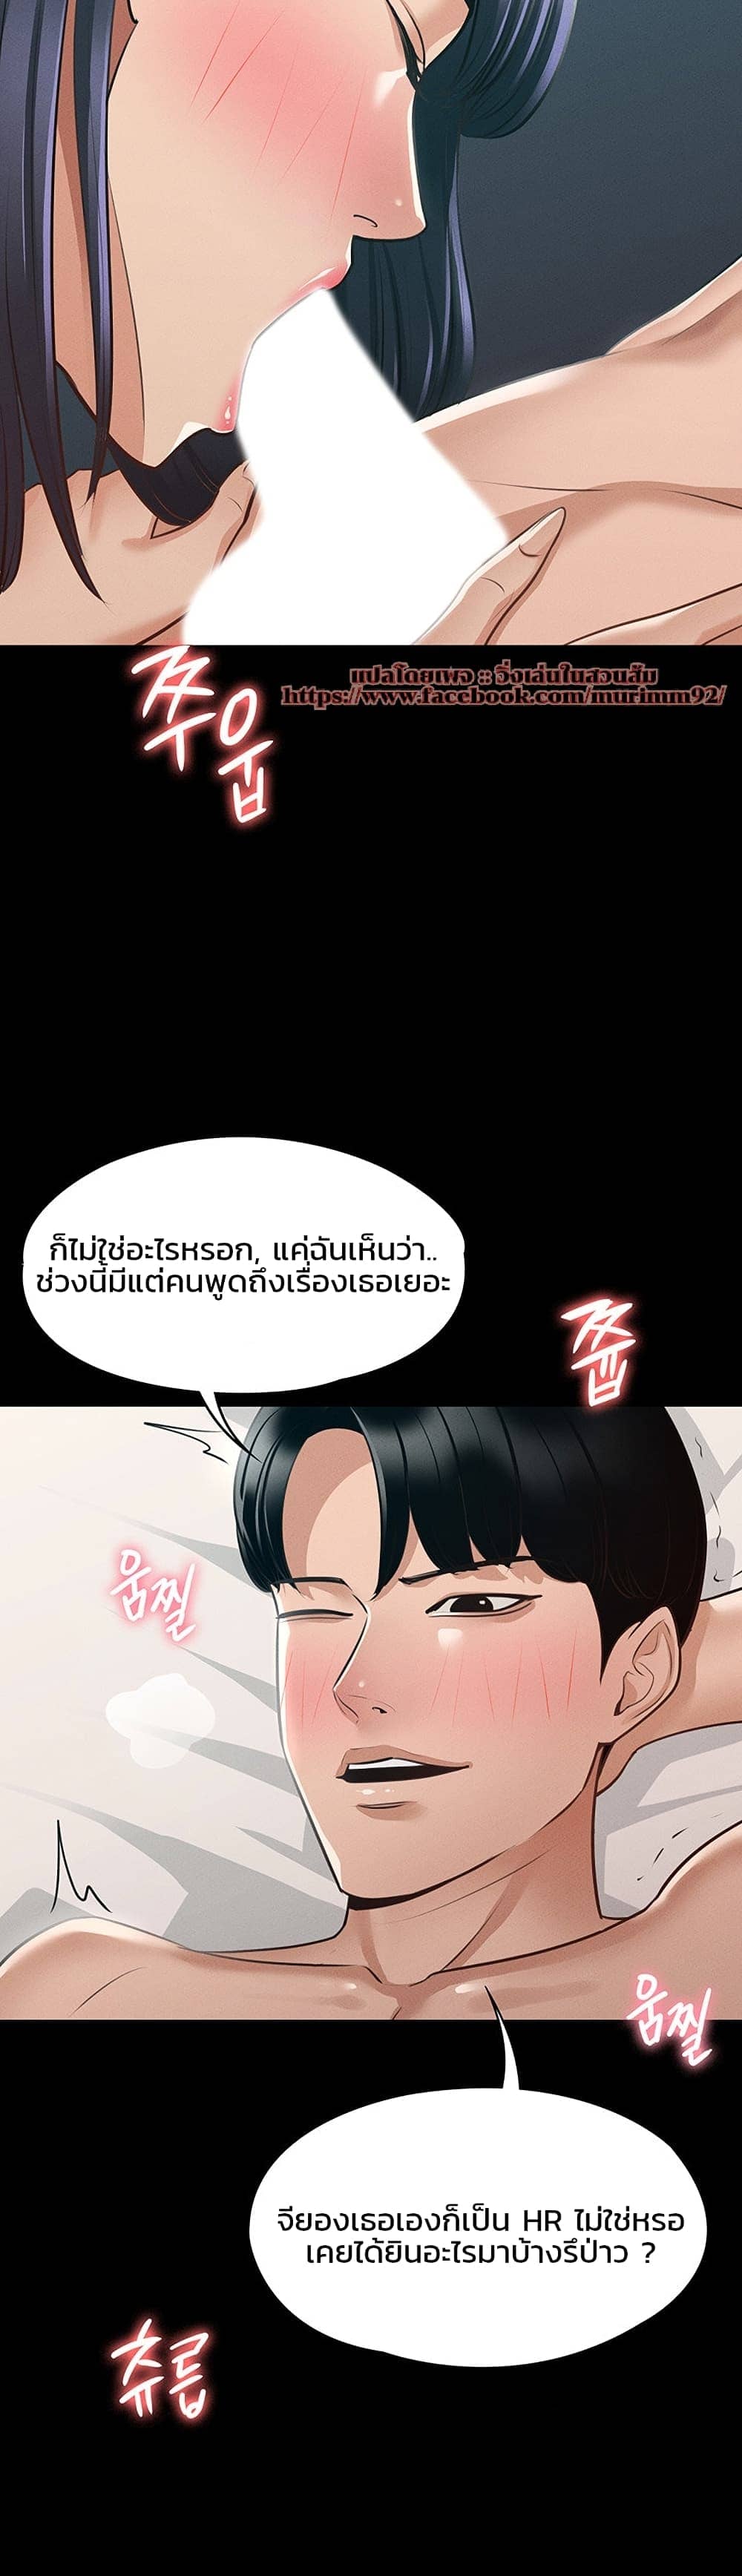 Workplace Manager Privileges ตอนที่ 8 ภาพ 25